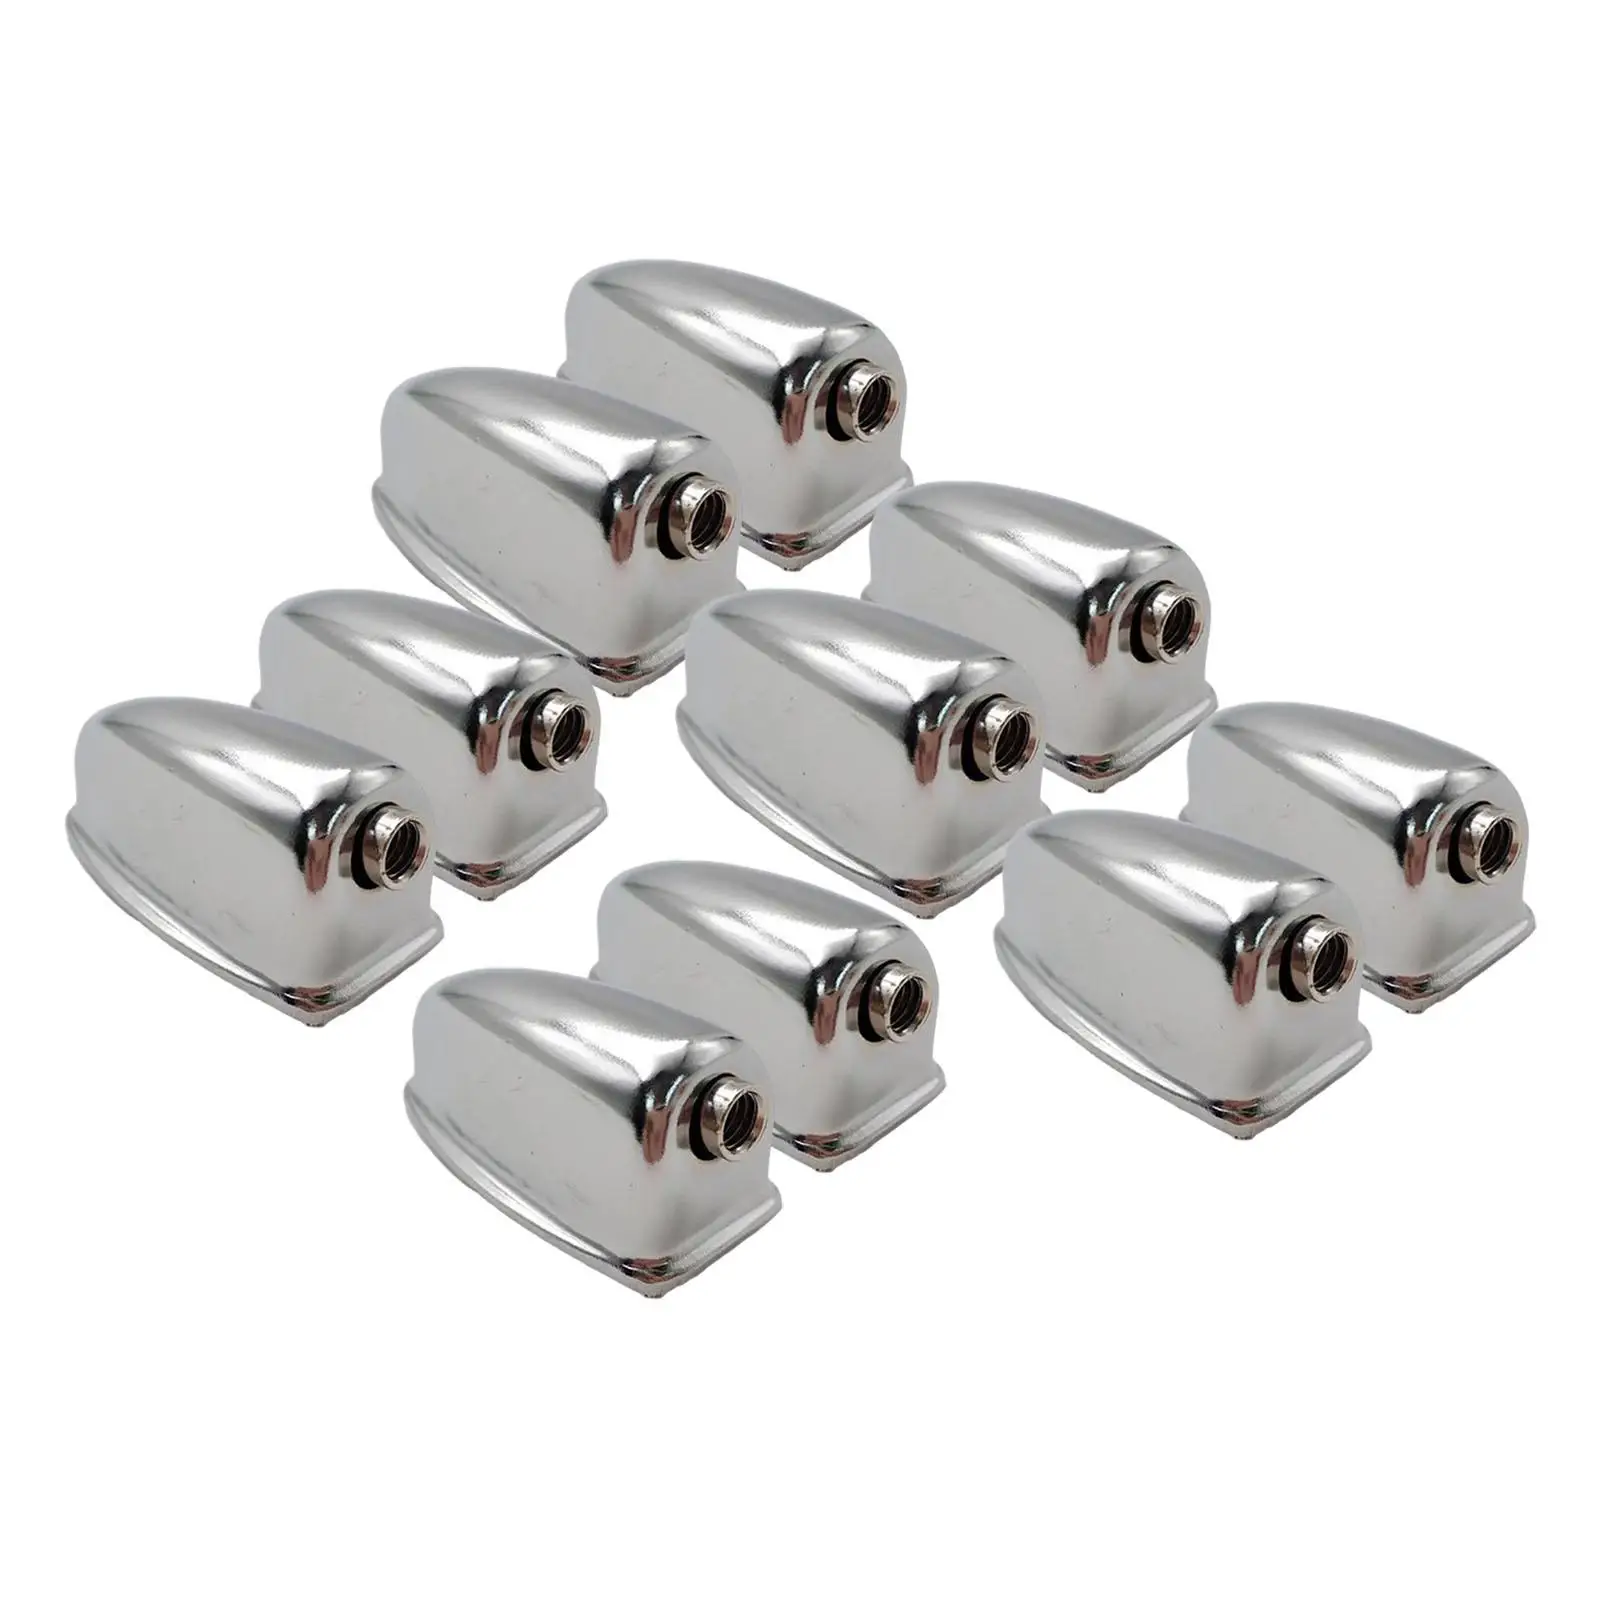 10 Pieces Snare Drum Lug Accessories Metal Lugs Snare Drum Parts for Drum Kits Snare Percussion Musical Instrument Maintenancing